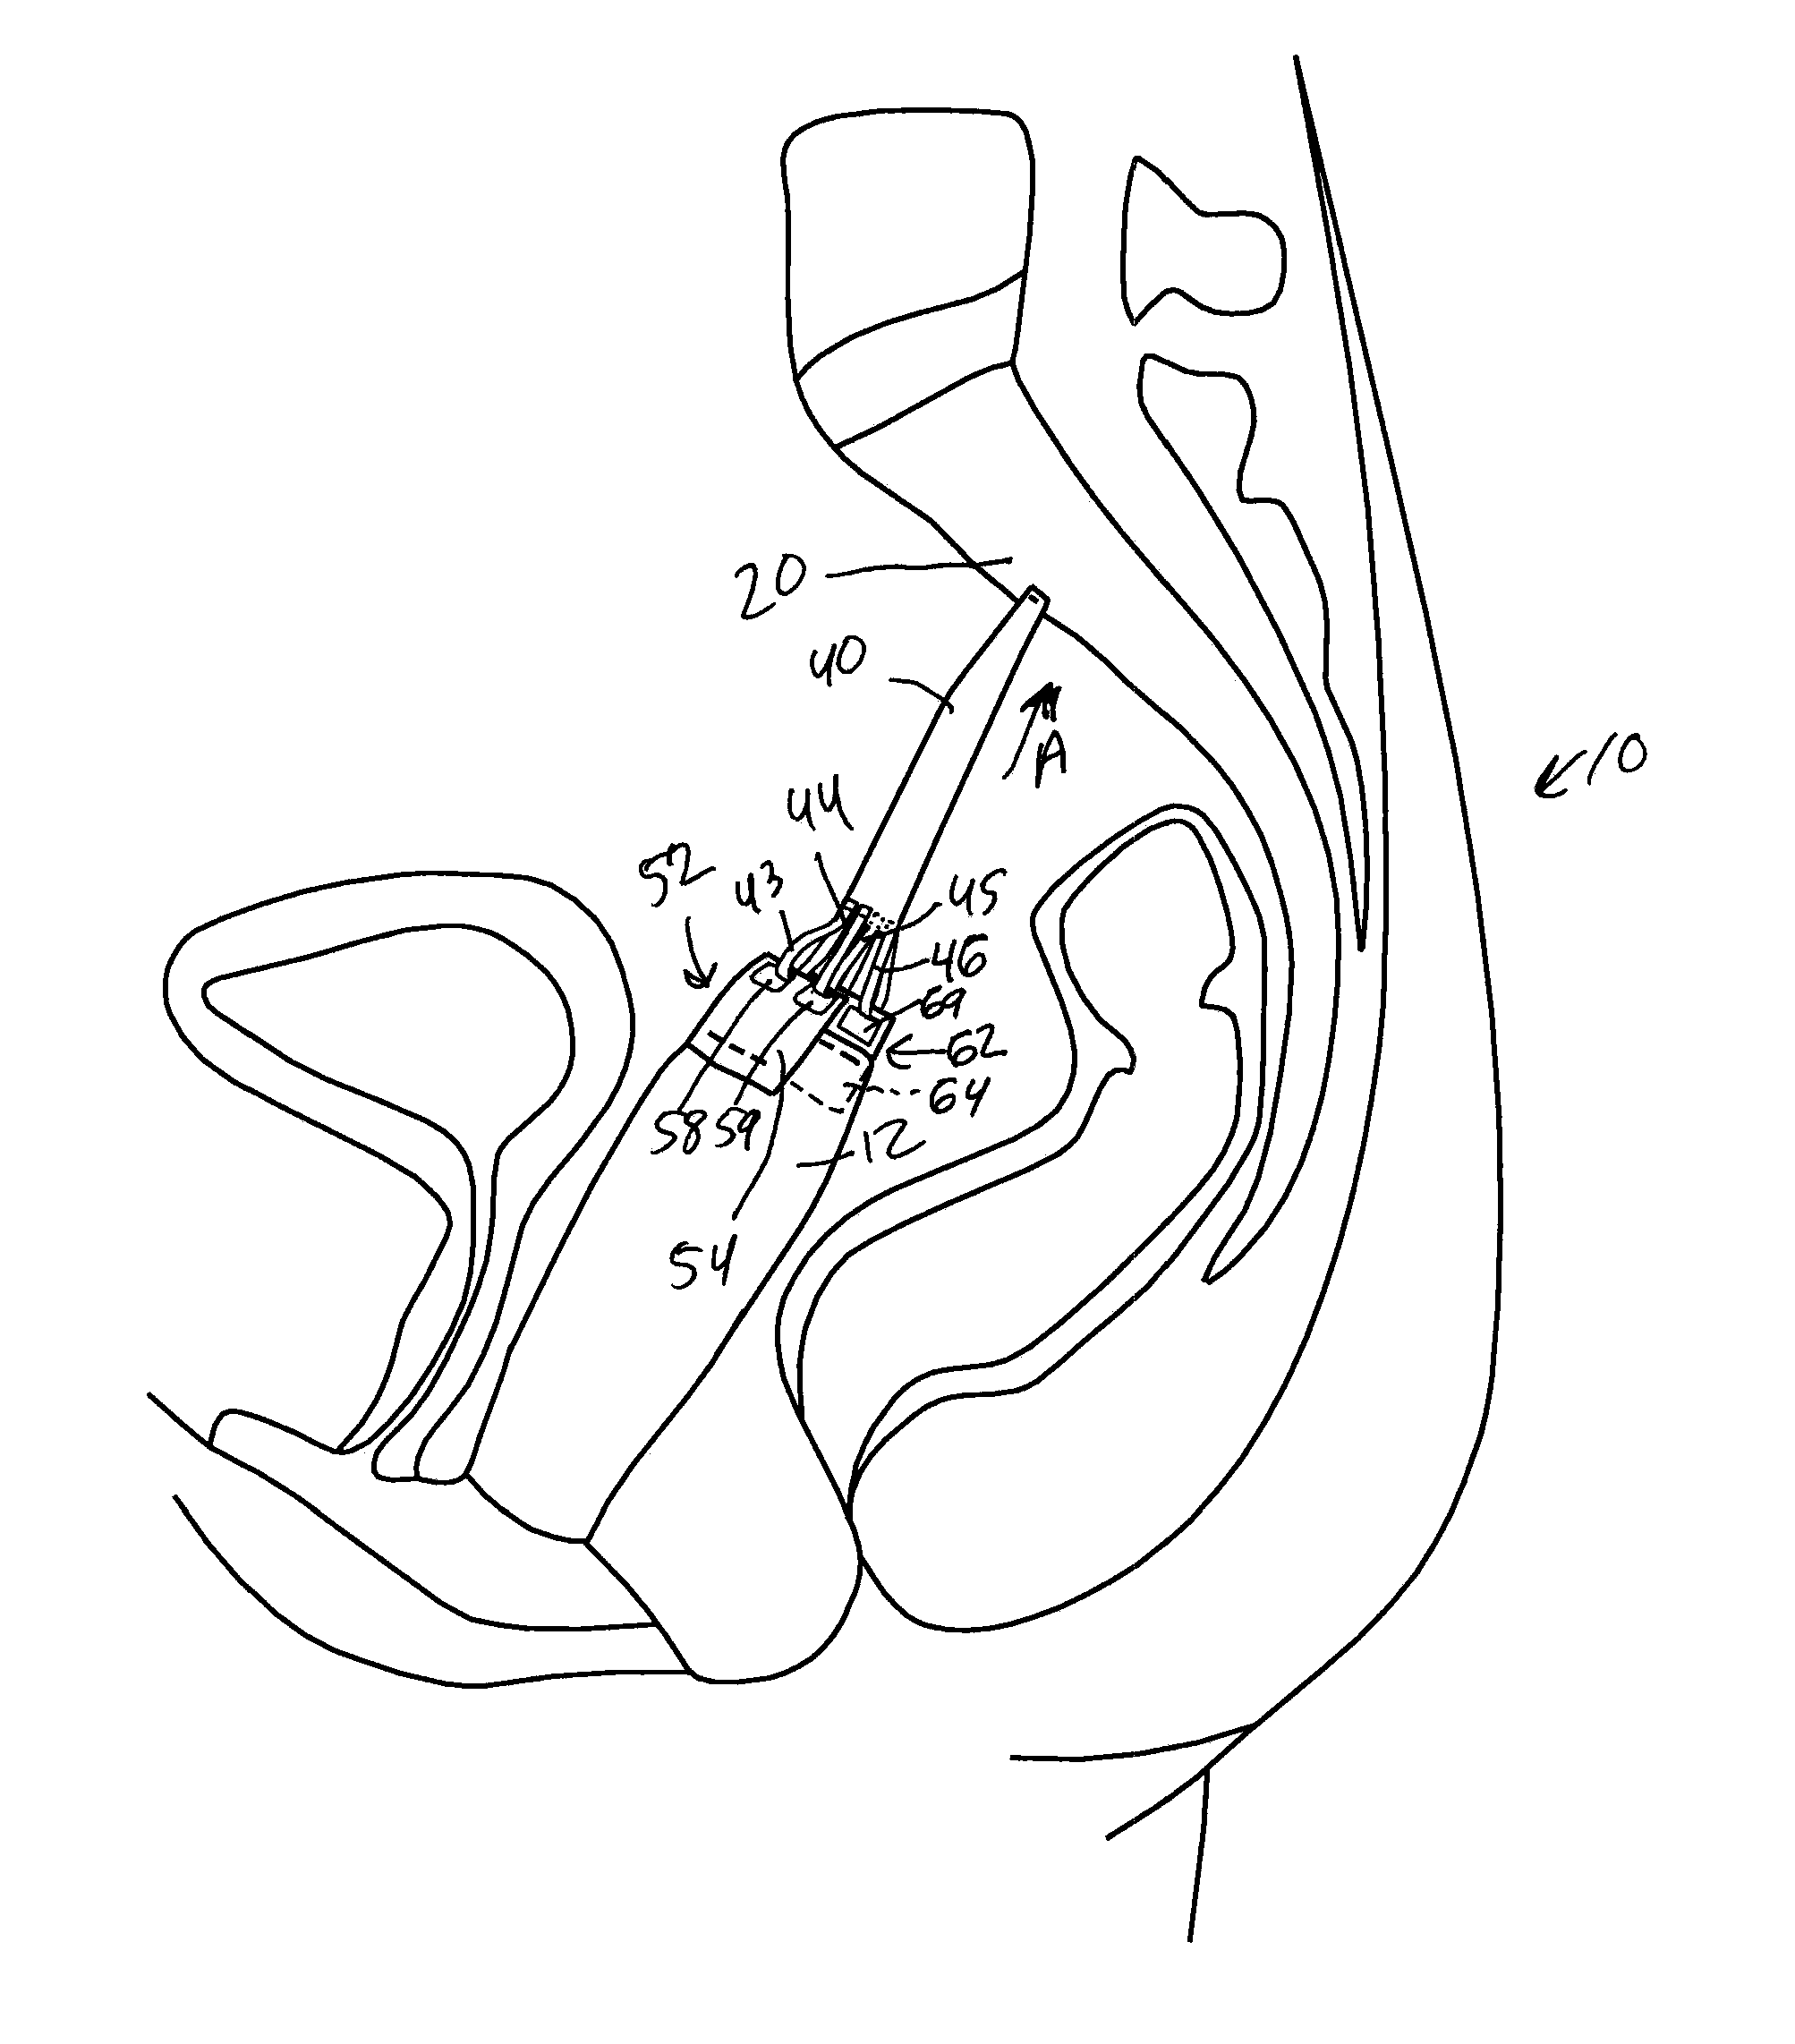 Vaginal vault suspension device and method